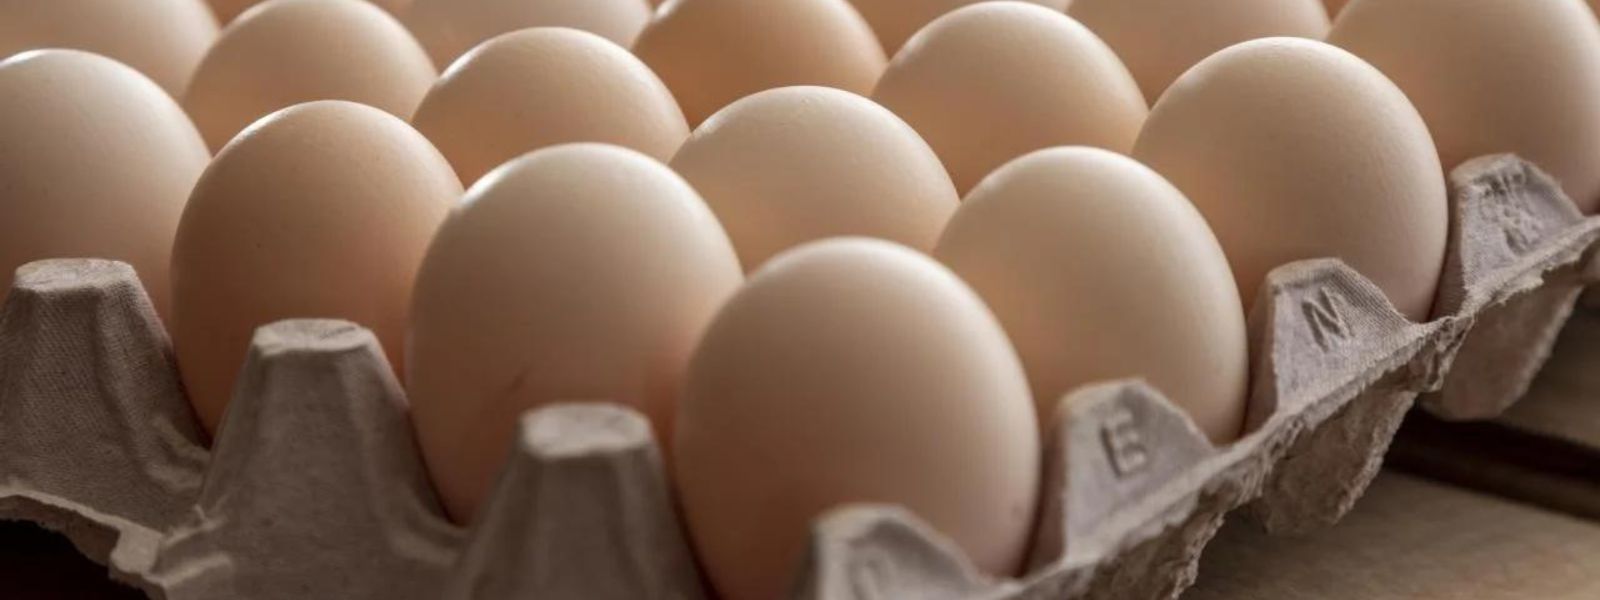 Minister of Agriculture explores opportunities to export eggs and chicken